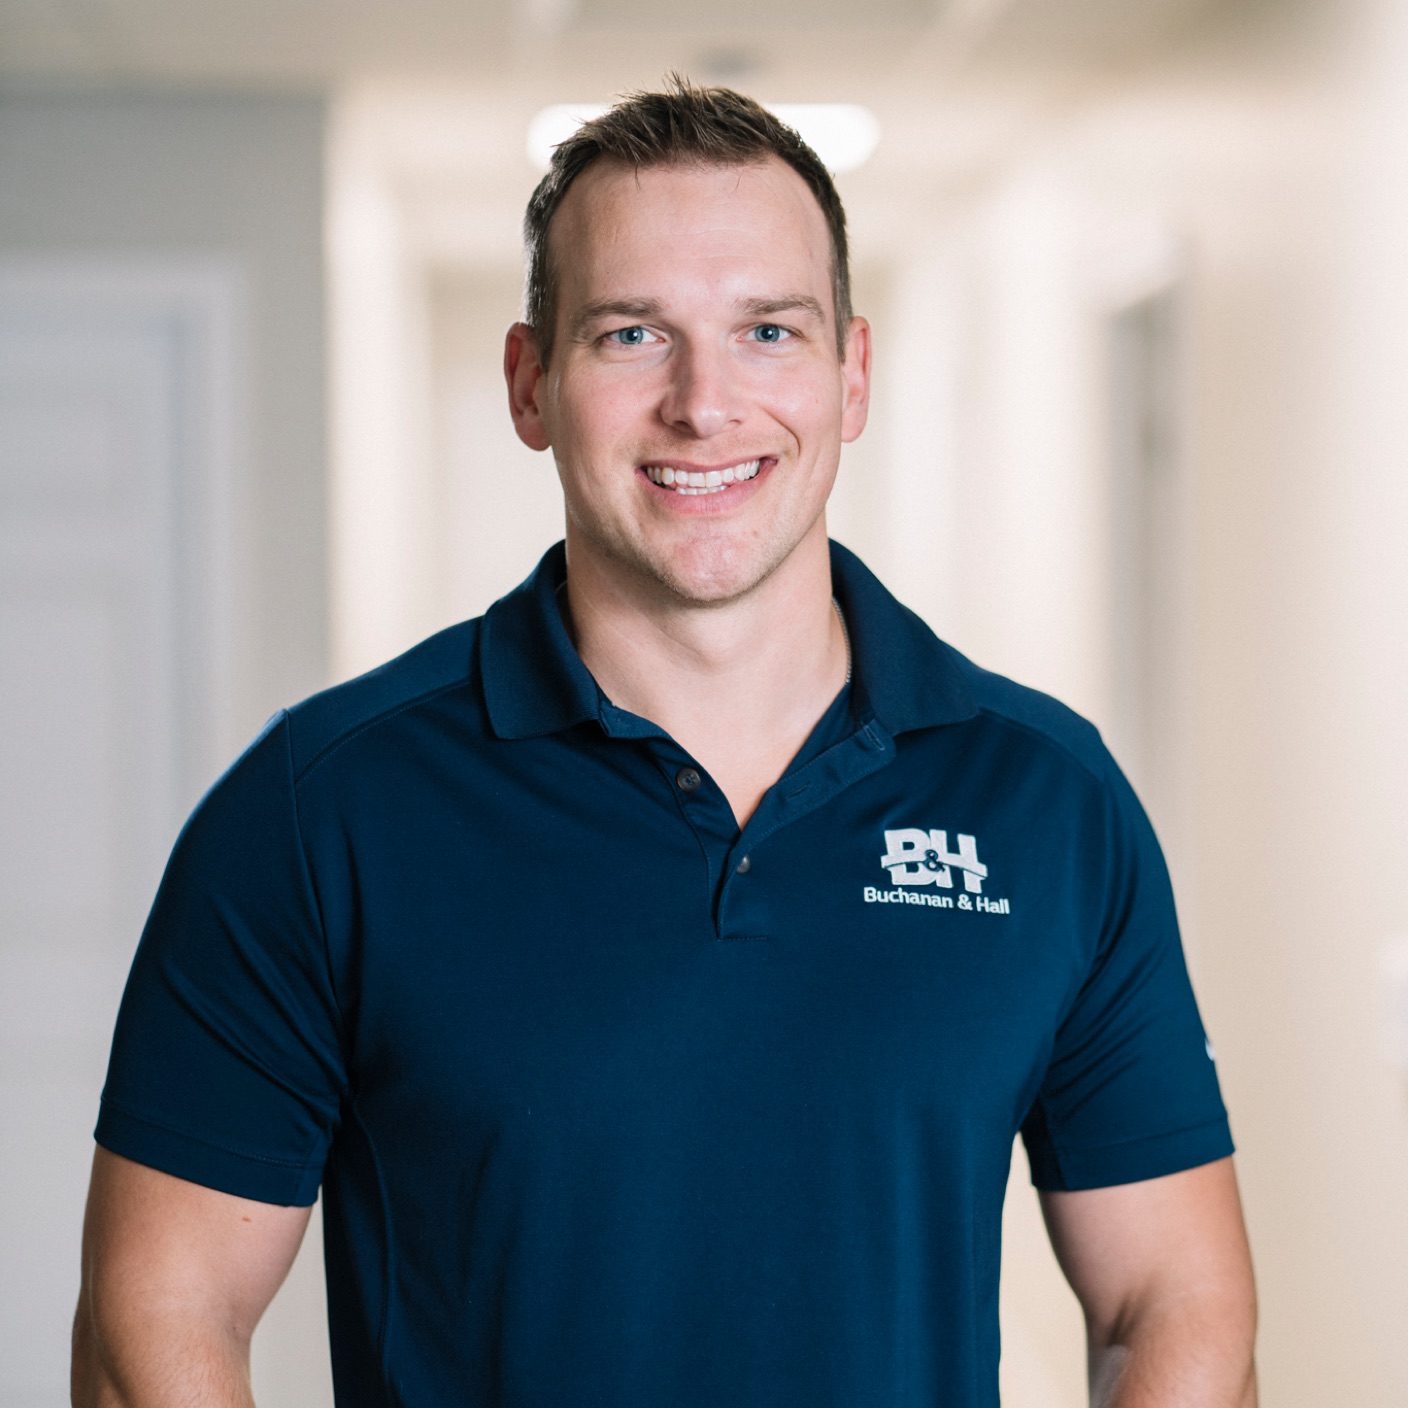 Headshot of a smiling male employee in a blue polo shirt, with a BH logo on the one side of his shirt